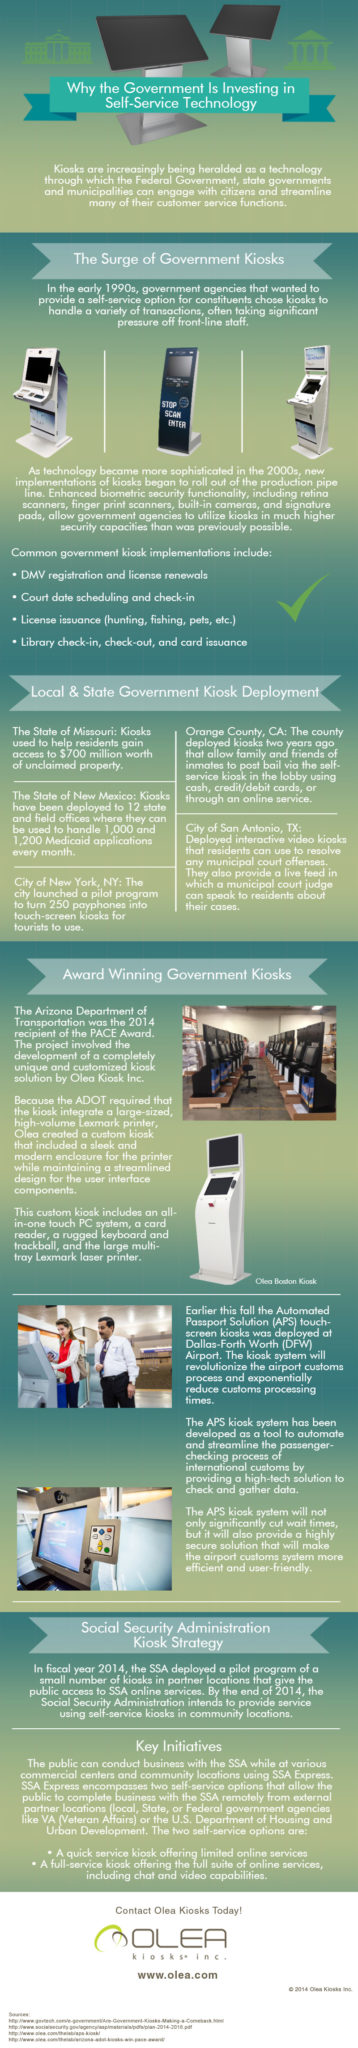 Government Kiosks - Why the government is increasing its investment in kiosk technologies